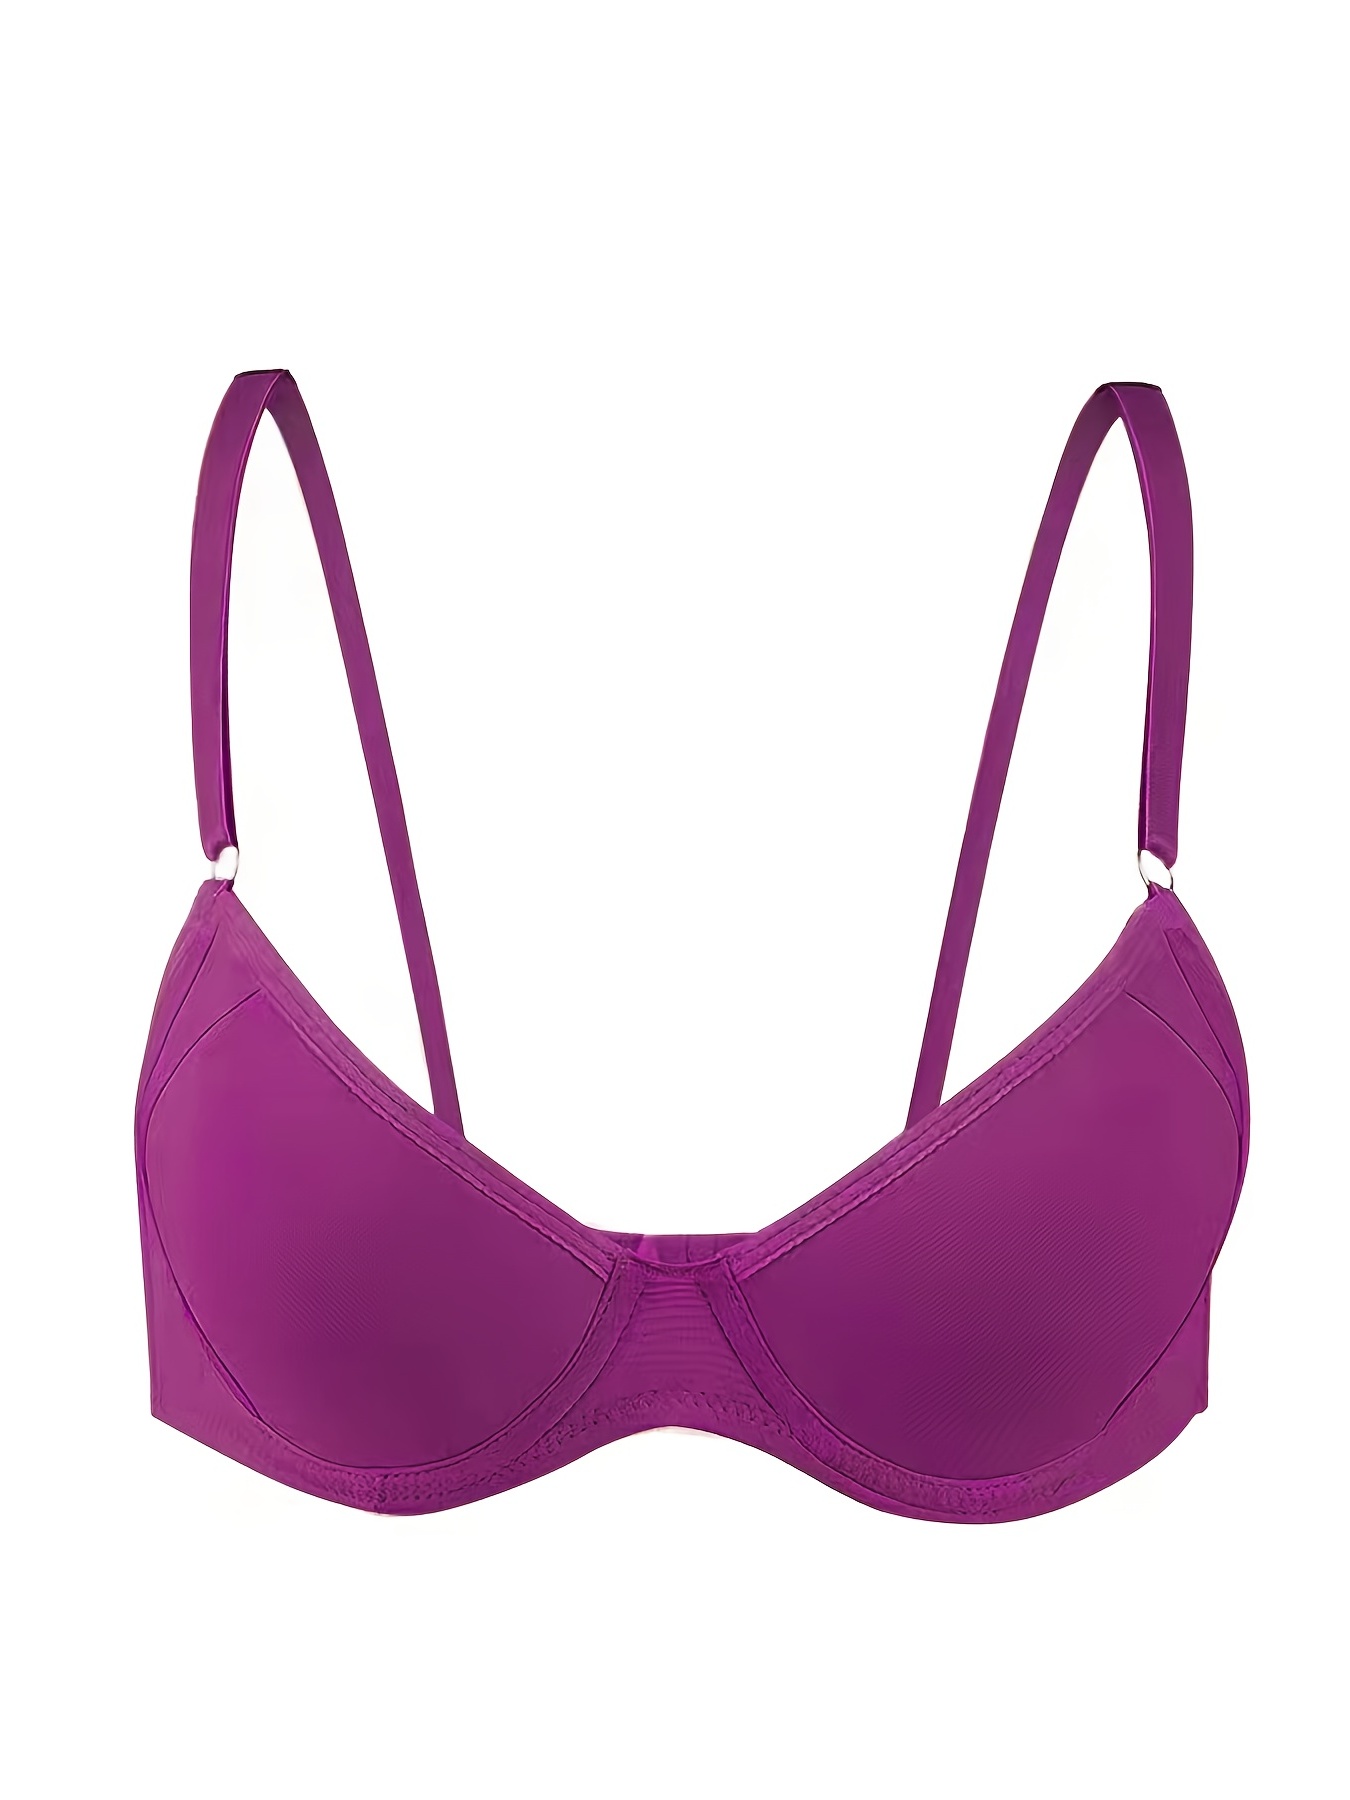 HANG BANG Women's Padded Non Wired Transparent Detachable Bra (Purple, 36B)  Women Everyday Lightly Padded Bra - Buy HANG BANG Women's Padded Non Wired  Transparent Detachable Bra (Purple, 36B) Women Everyday Lightly